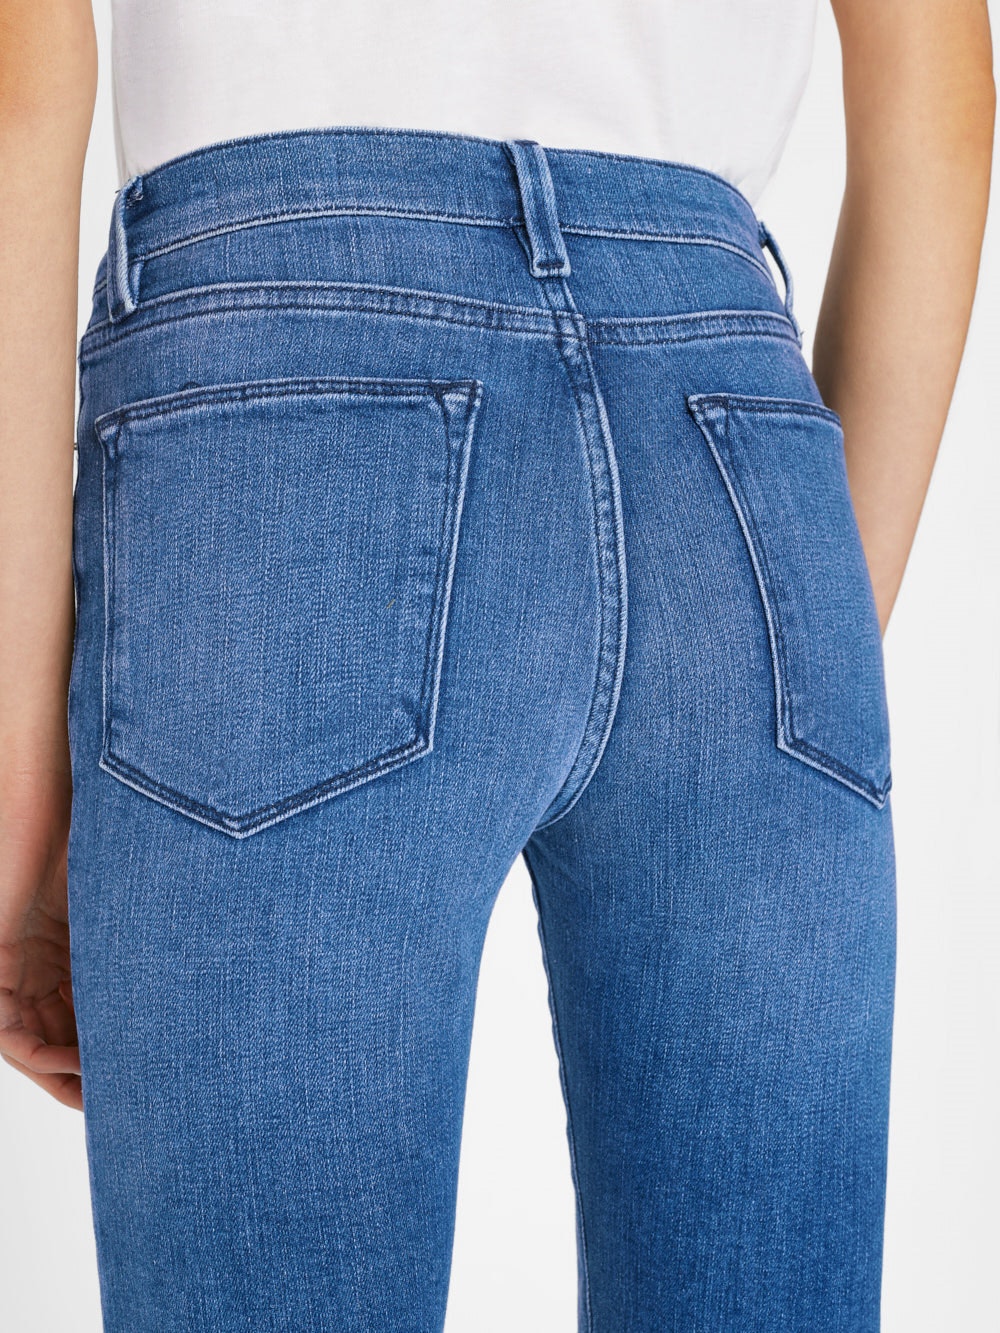 The back view of a woman in Frame's Le High Straight - Temple blue jeans.